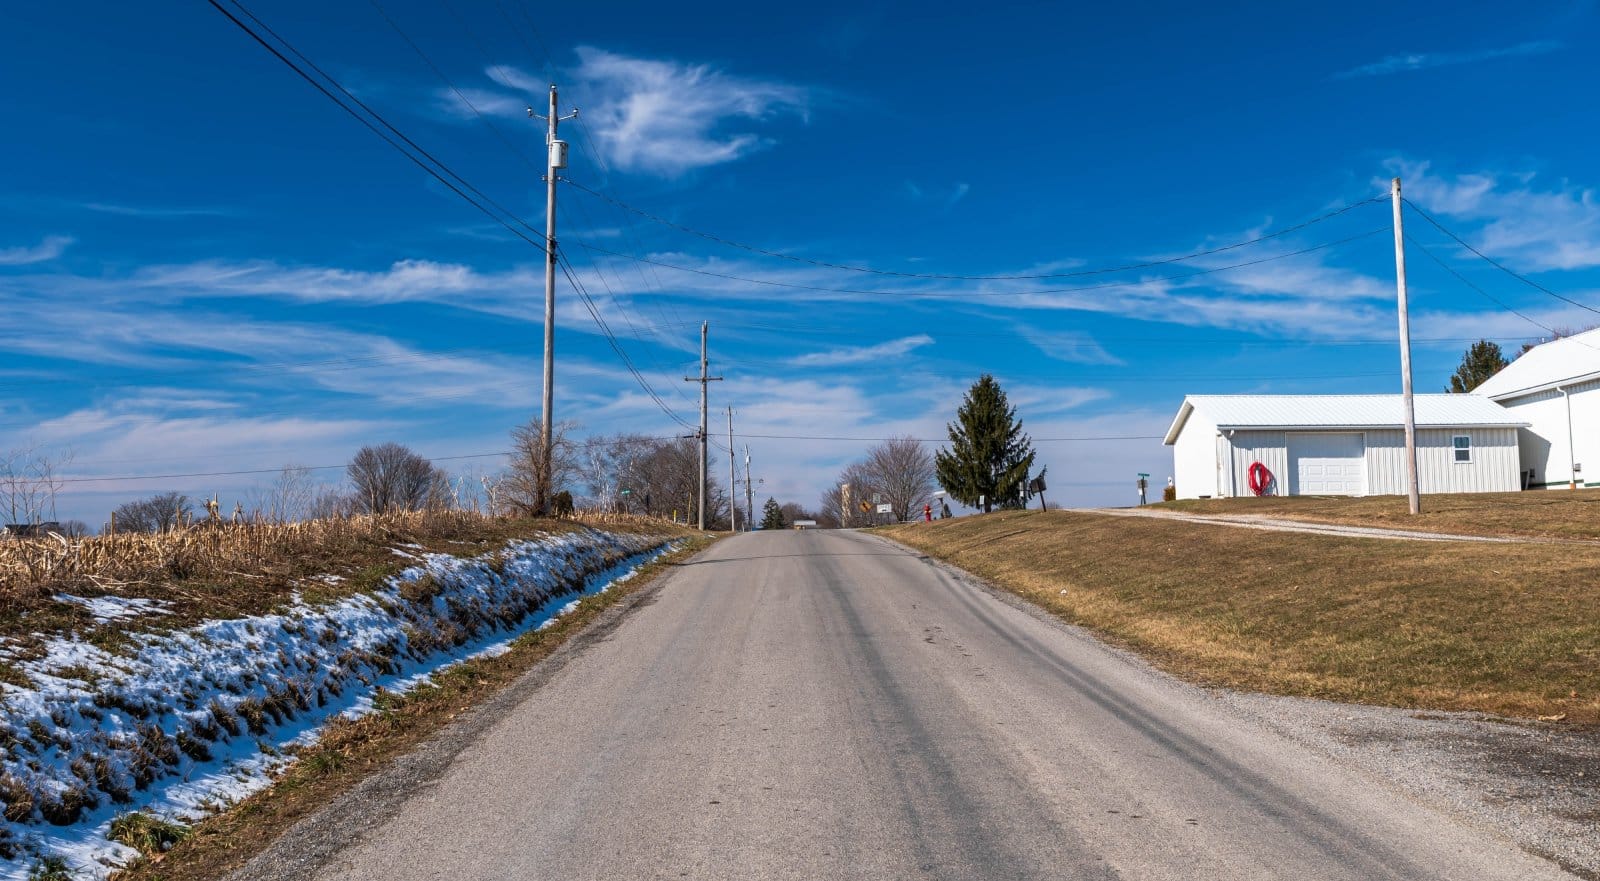 Image Credit: Shutterstock / woodsnorthphoto <p><span>Slow broadband rollout in rural areas keeps parts of Pennsylvania disconnected from the digital age.</span></p>